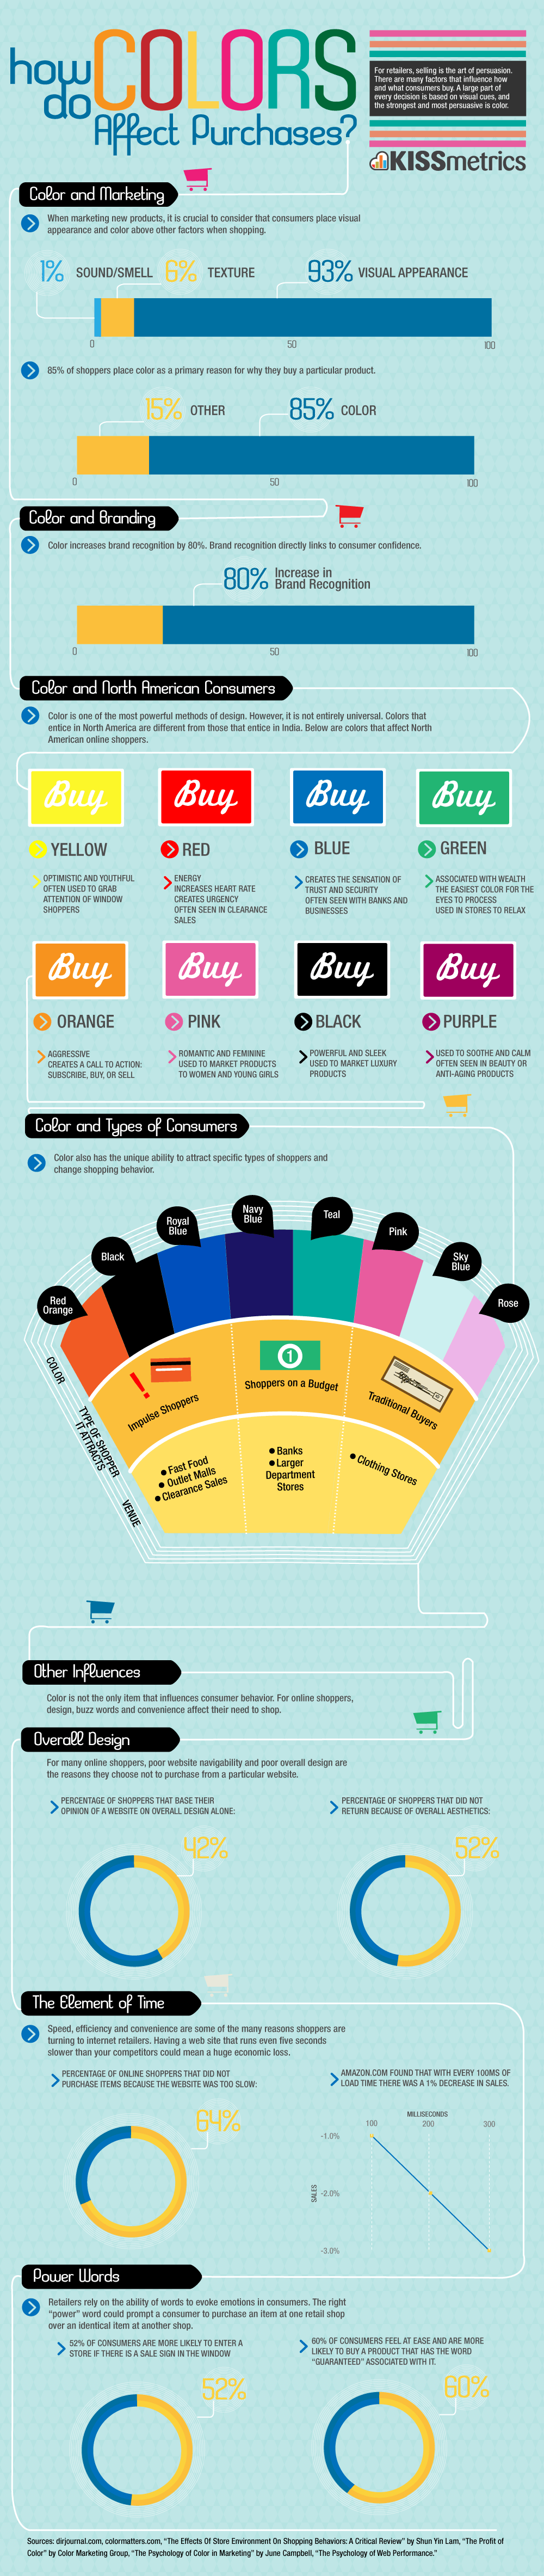 Download How Do Colors Affect Purchases Infographic